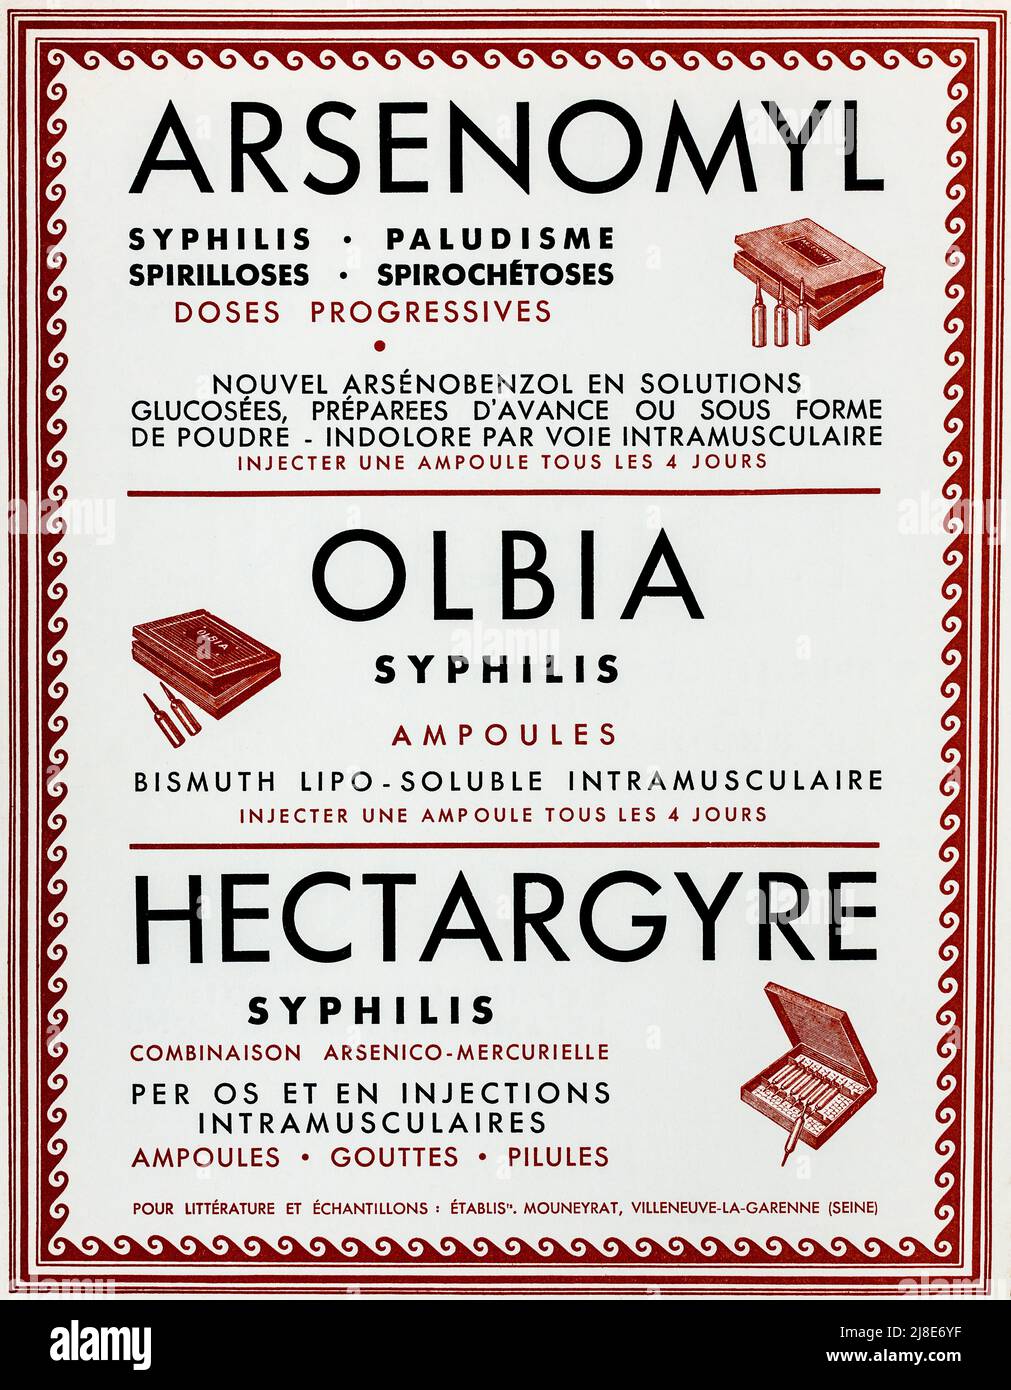 French 1950s advertisement for Hectagyre treatment for syphilis. Stock Photo